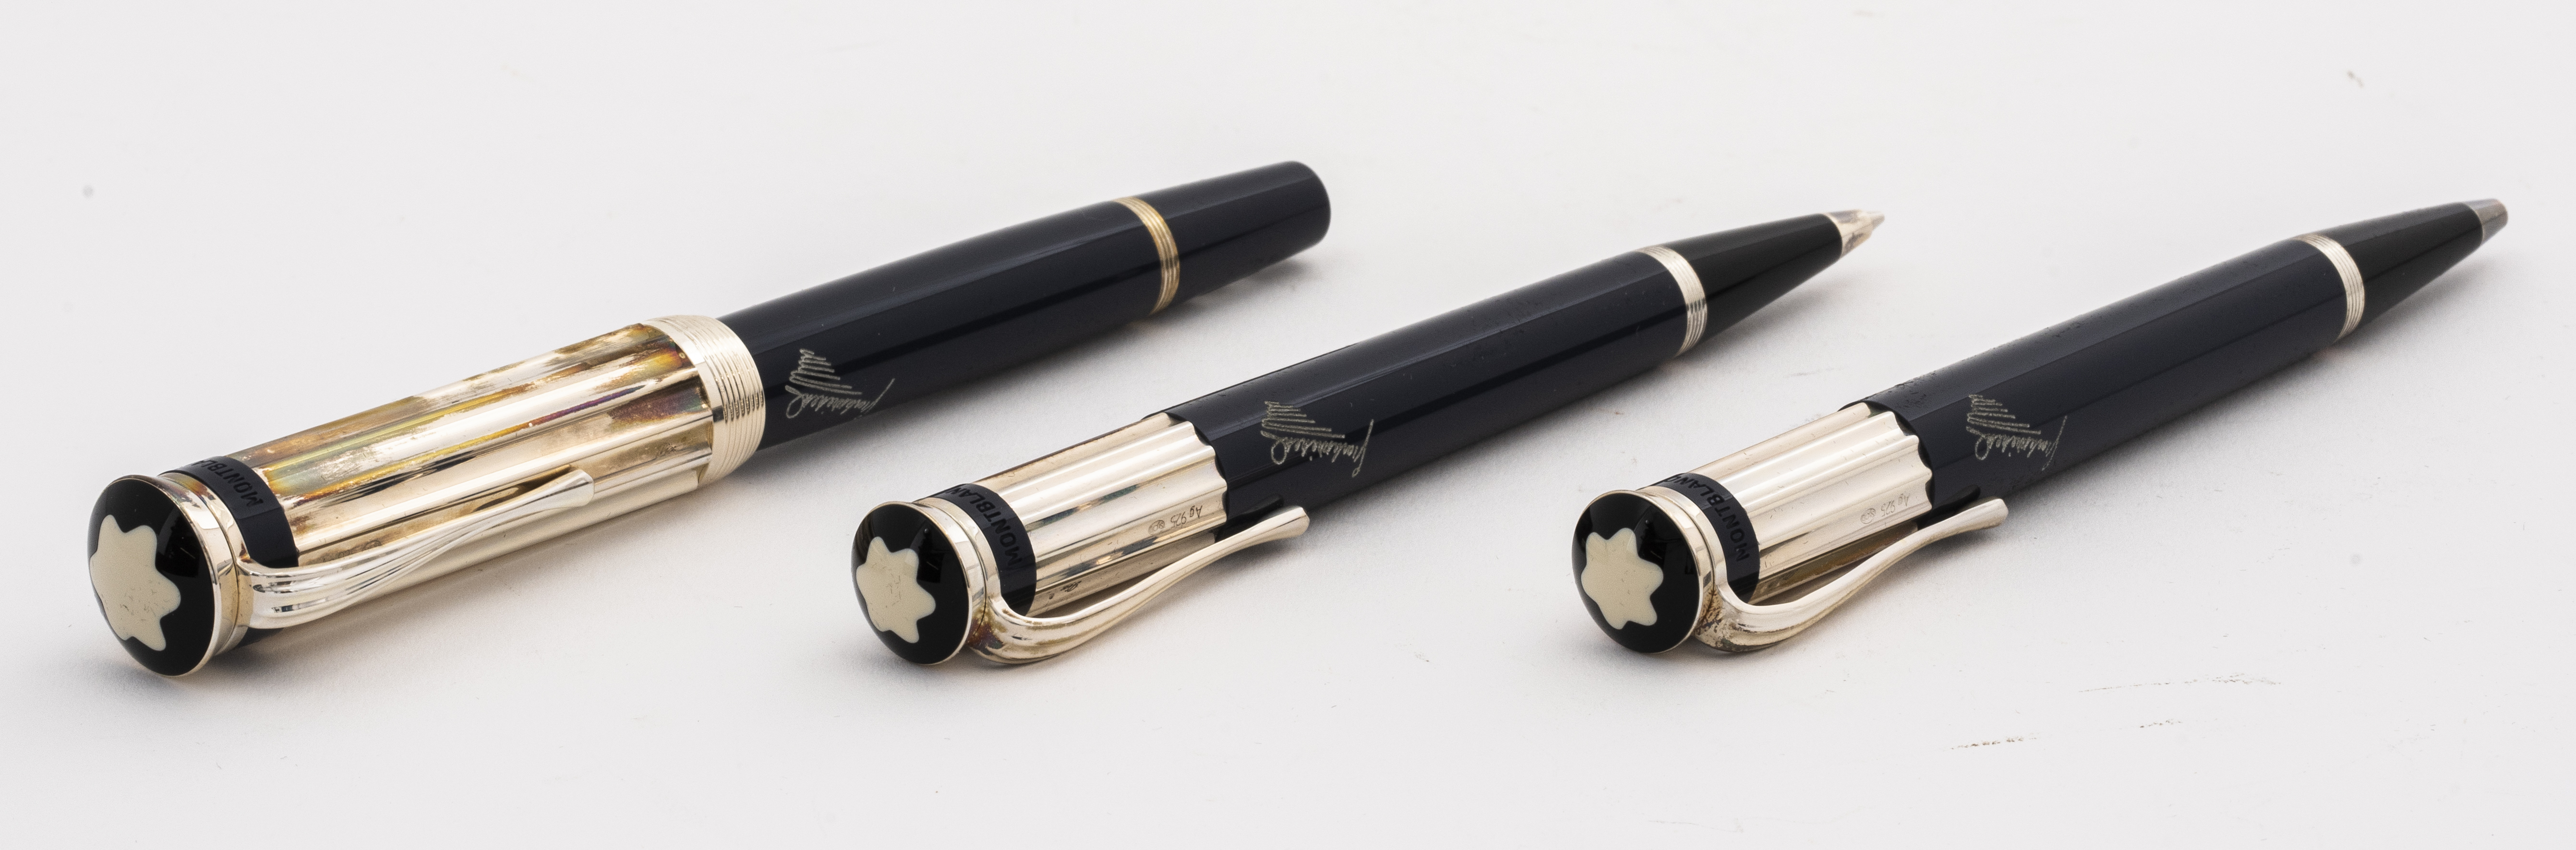 MONTBLANC CHARLES DICKENS PEN 2d3342